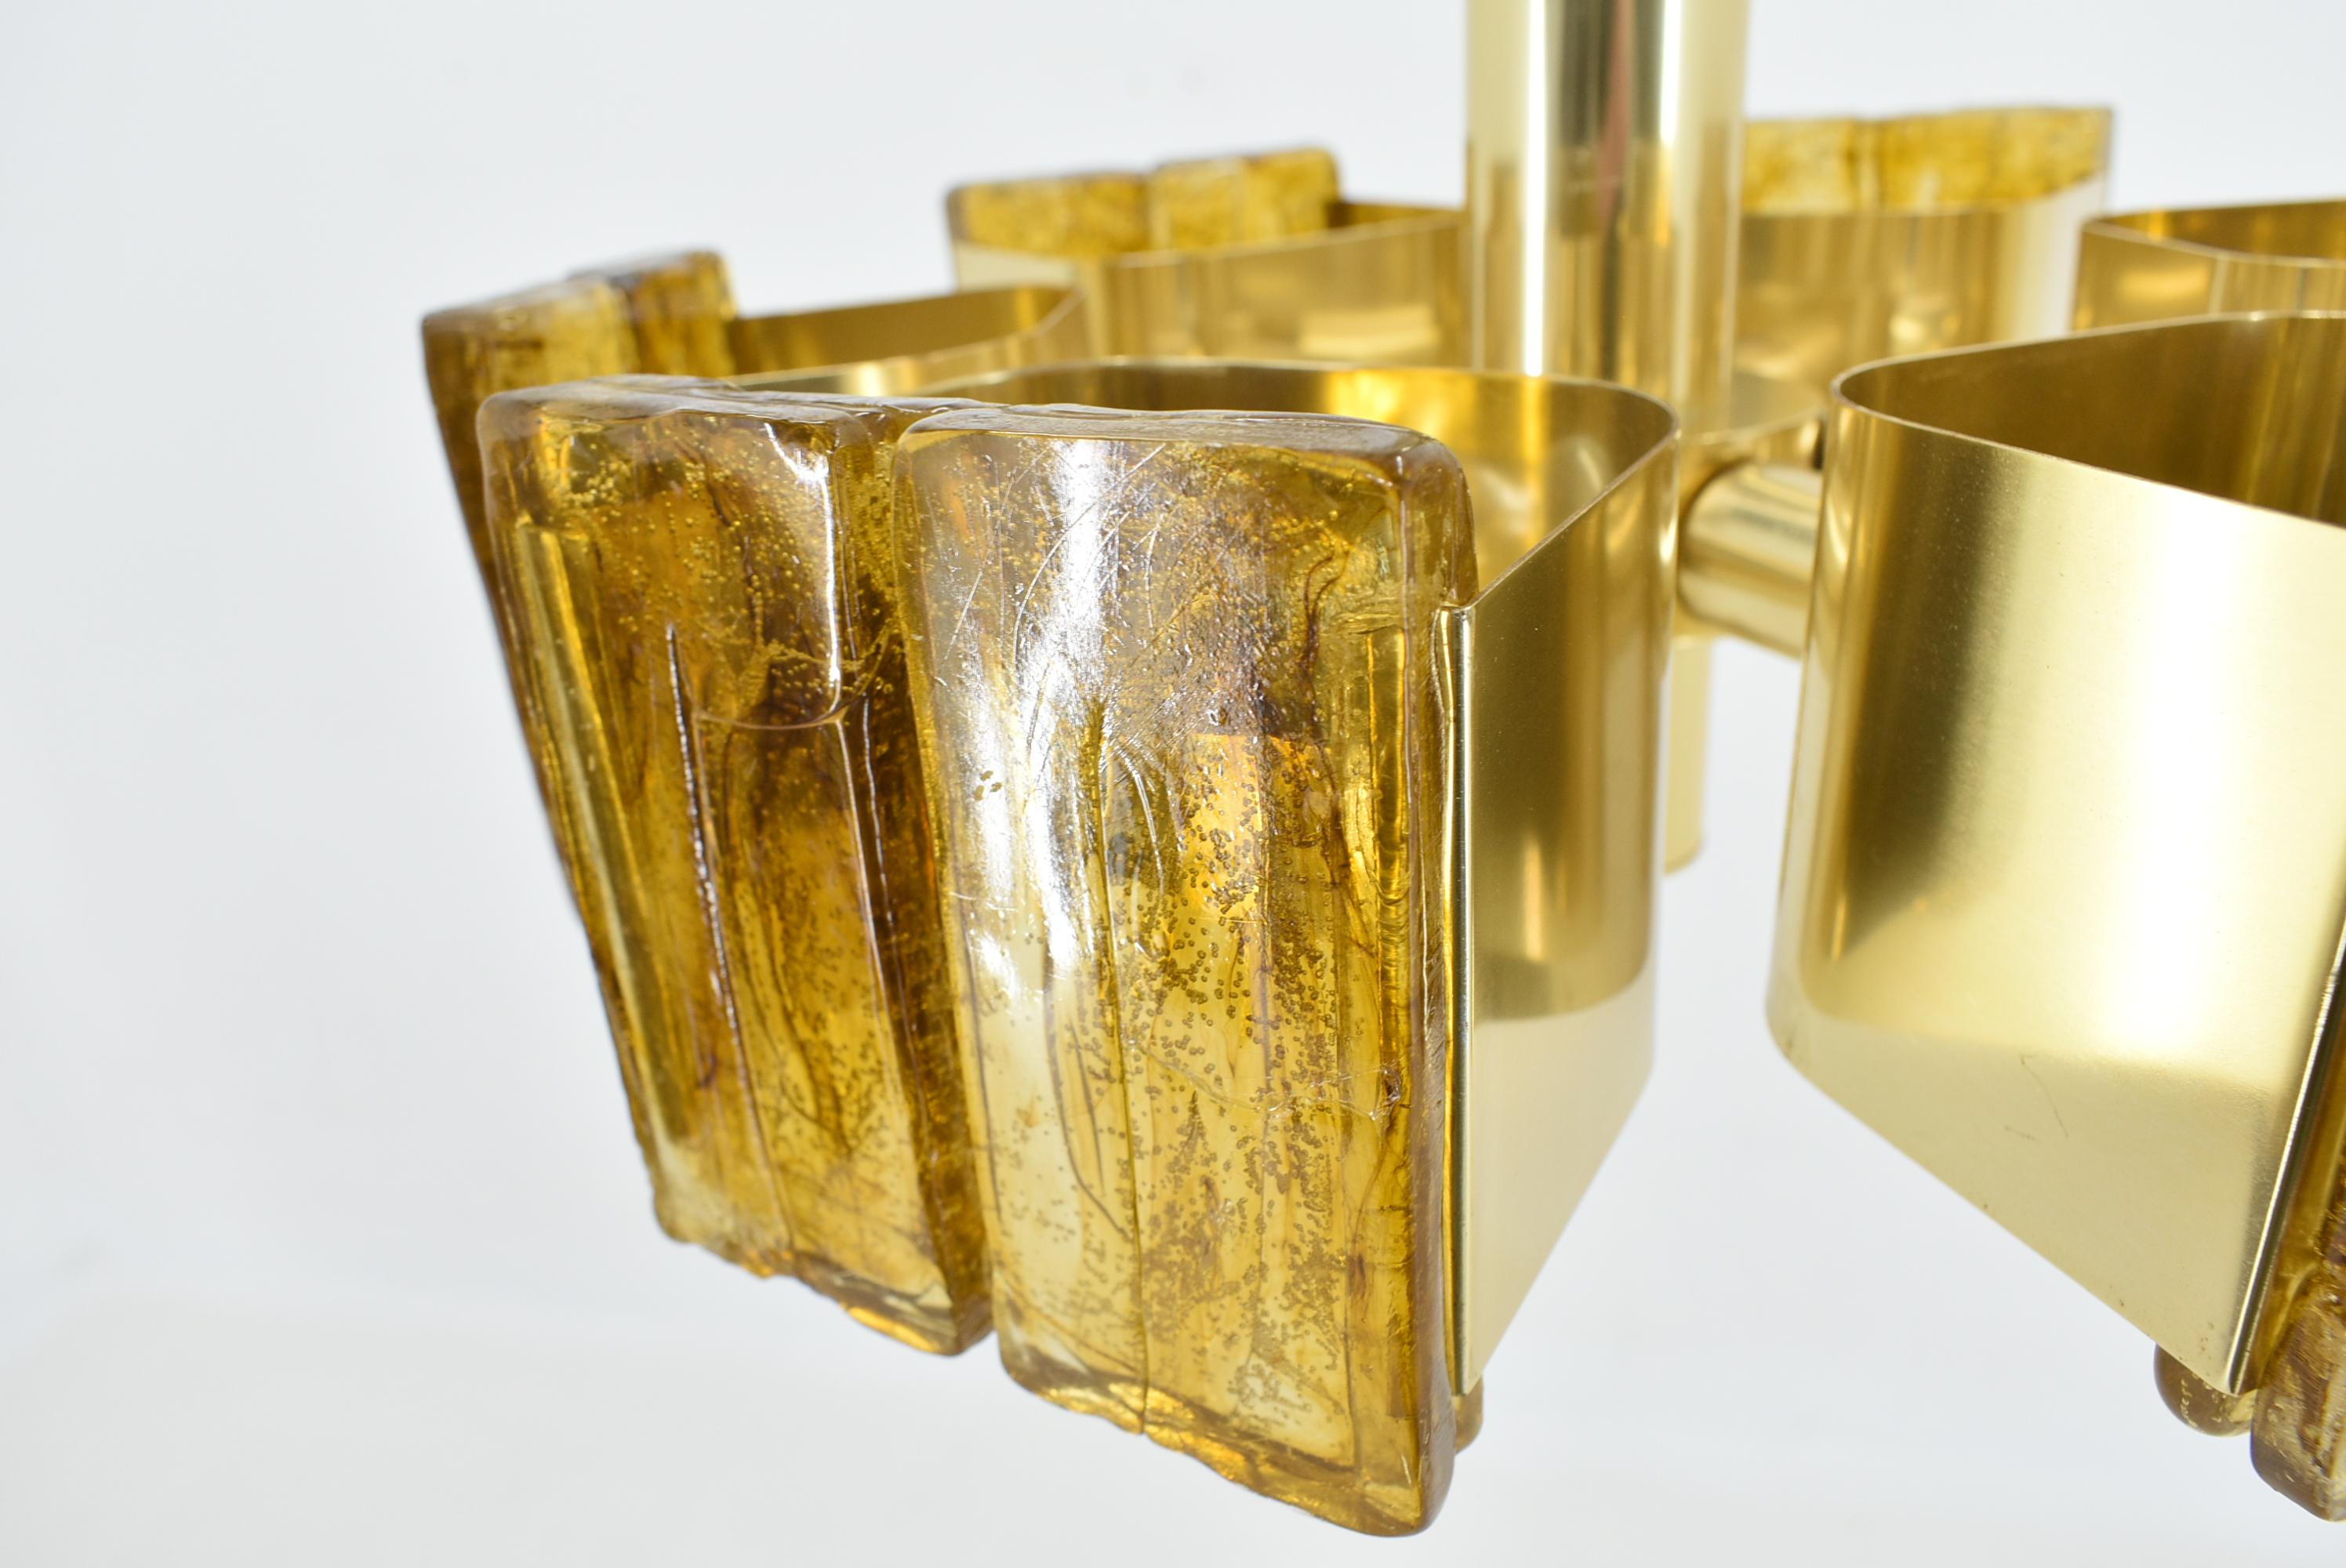 Mid-20th Century Mid-Century Design Brass and Resin Pendant, 1960s / Hungary For Sale